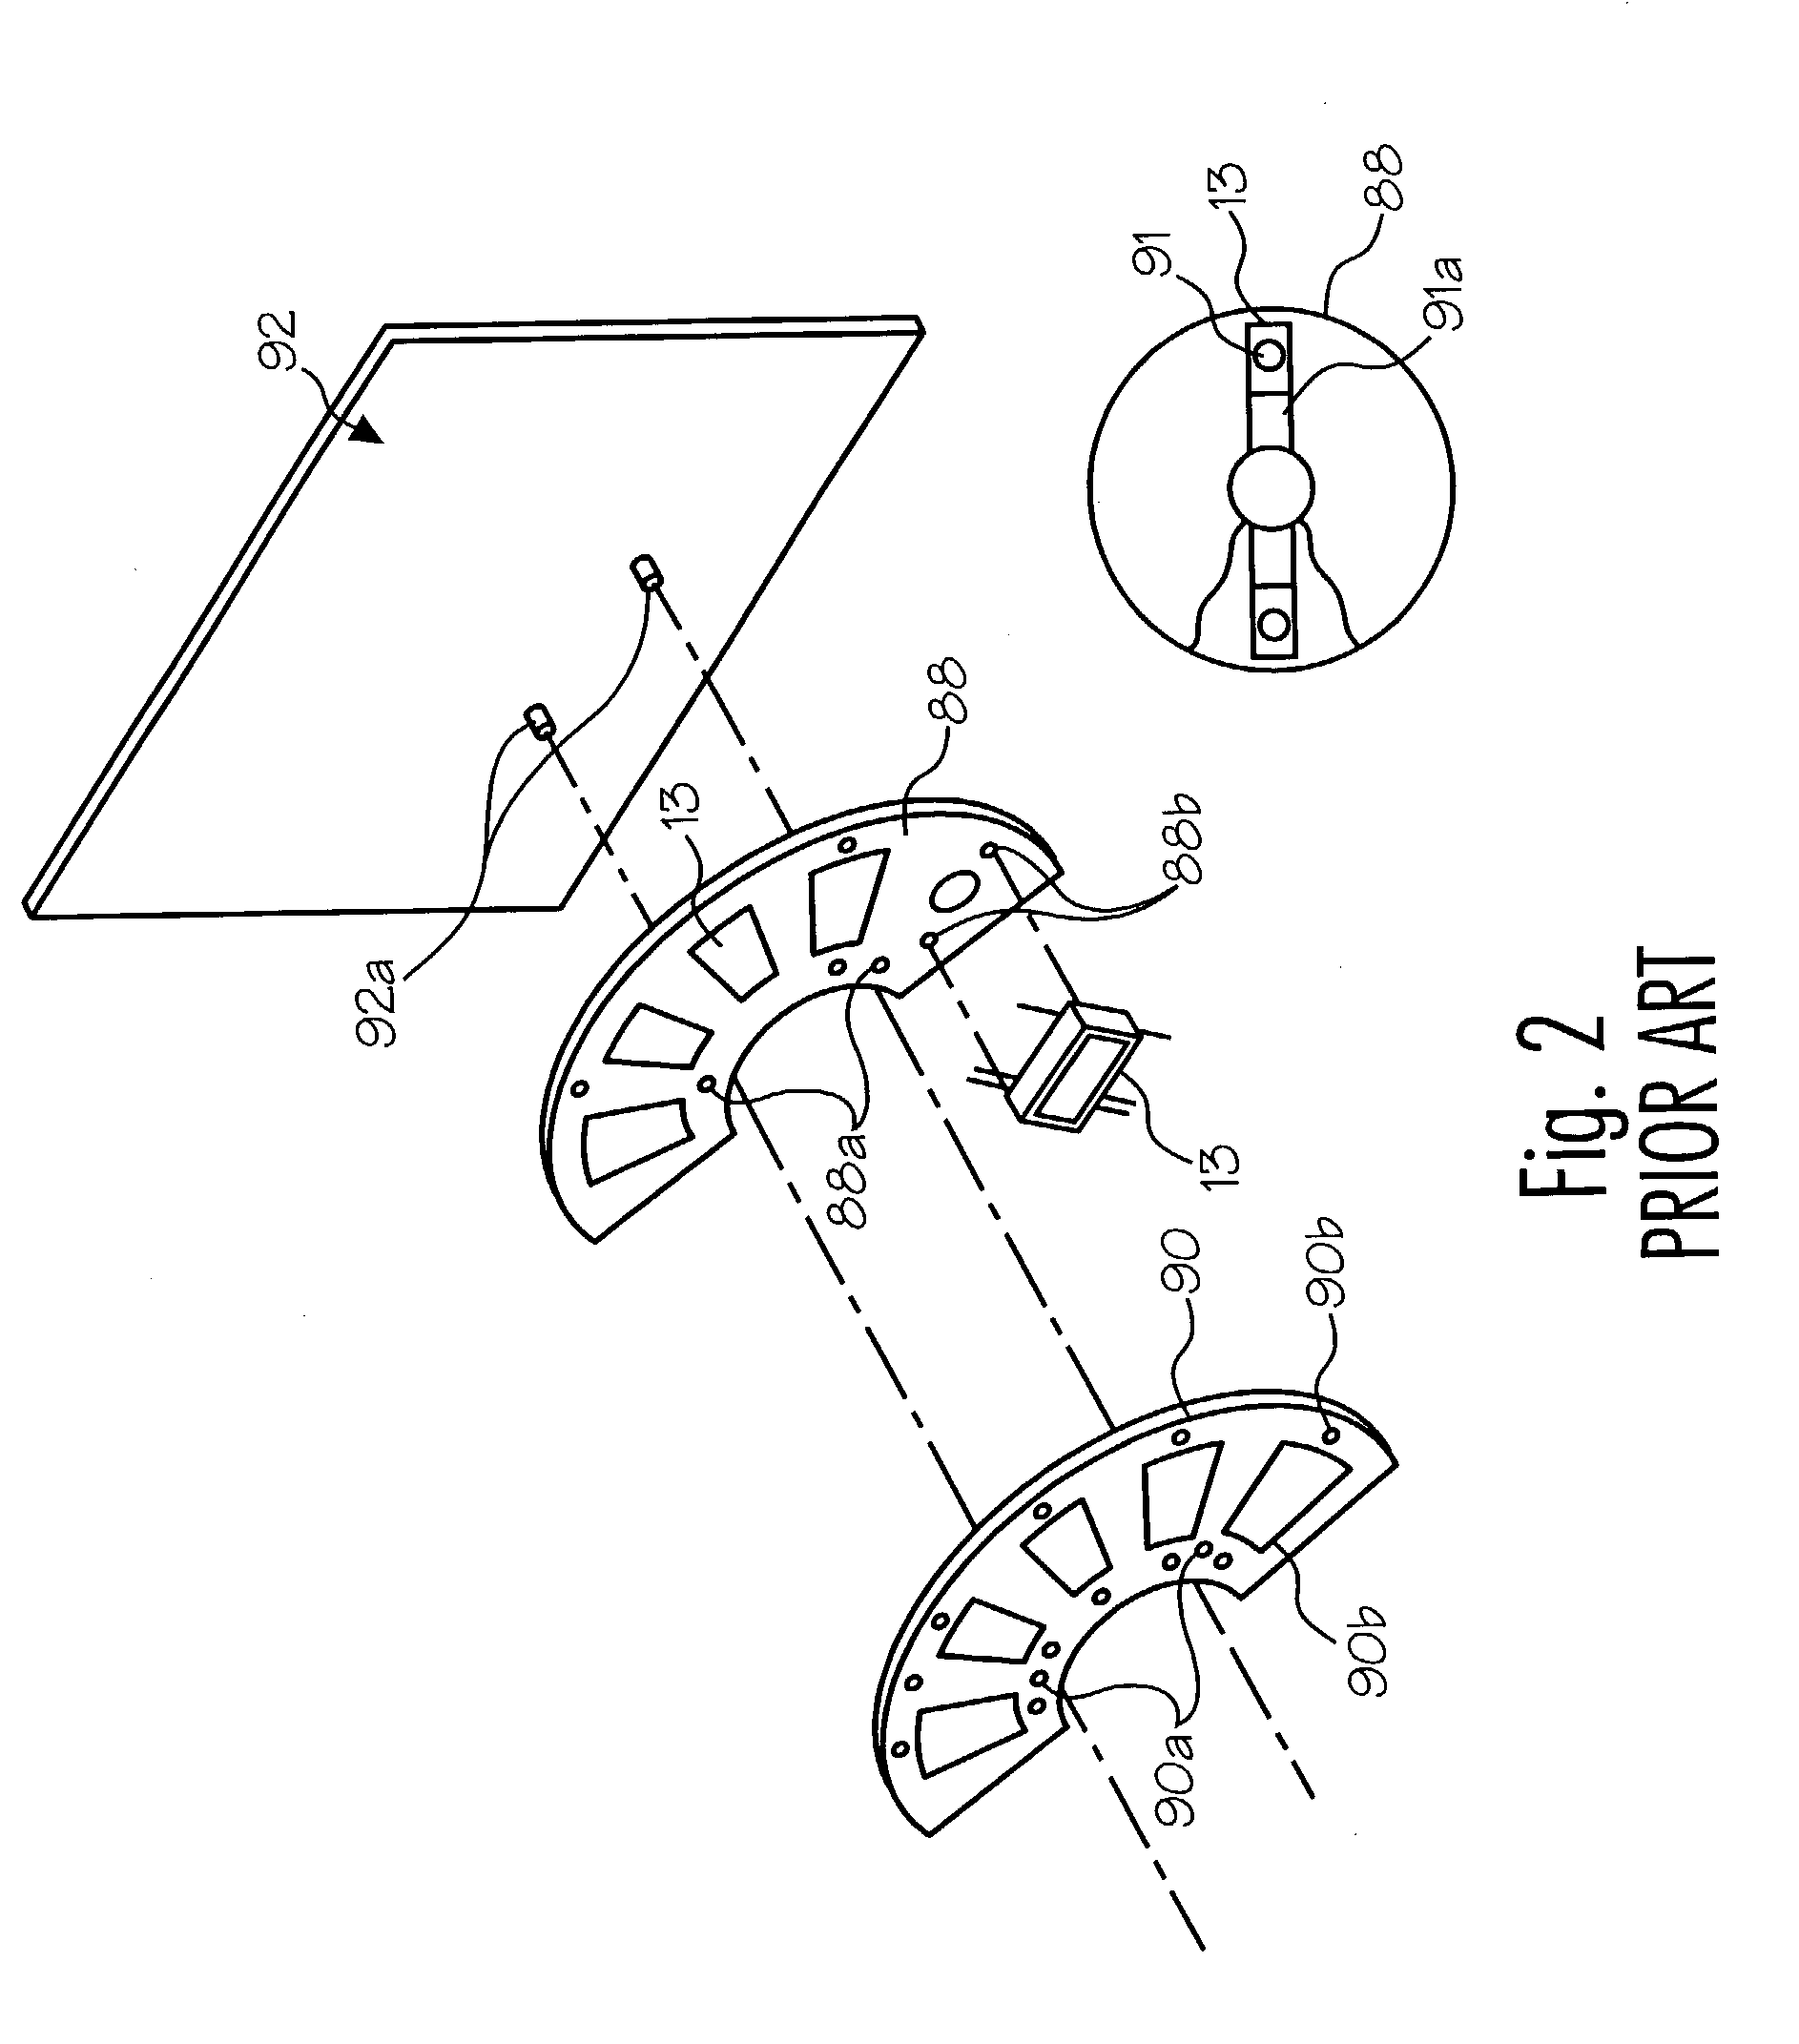 Spray coating apparatus and fixtures